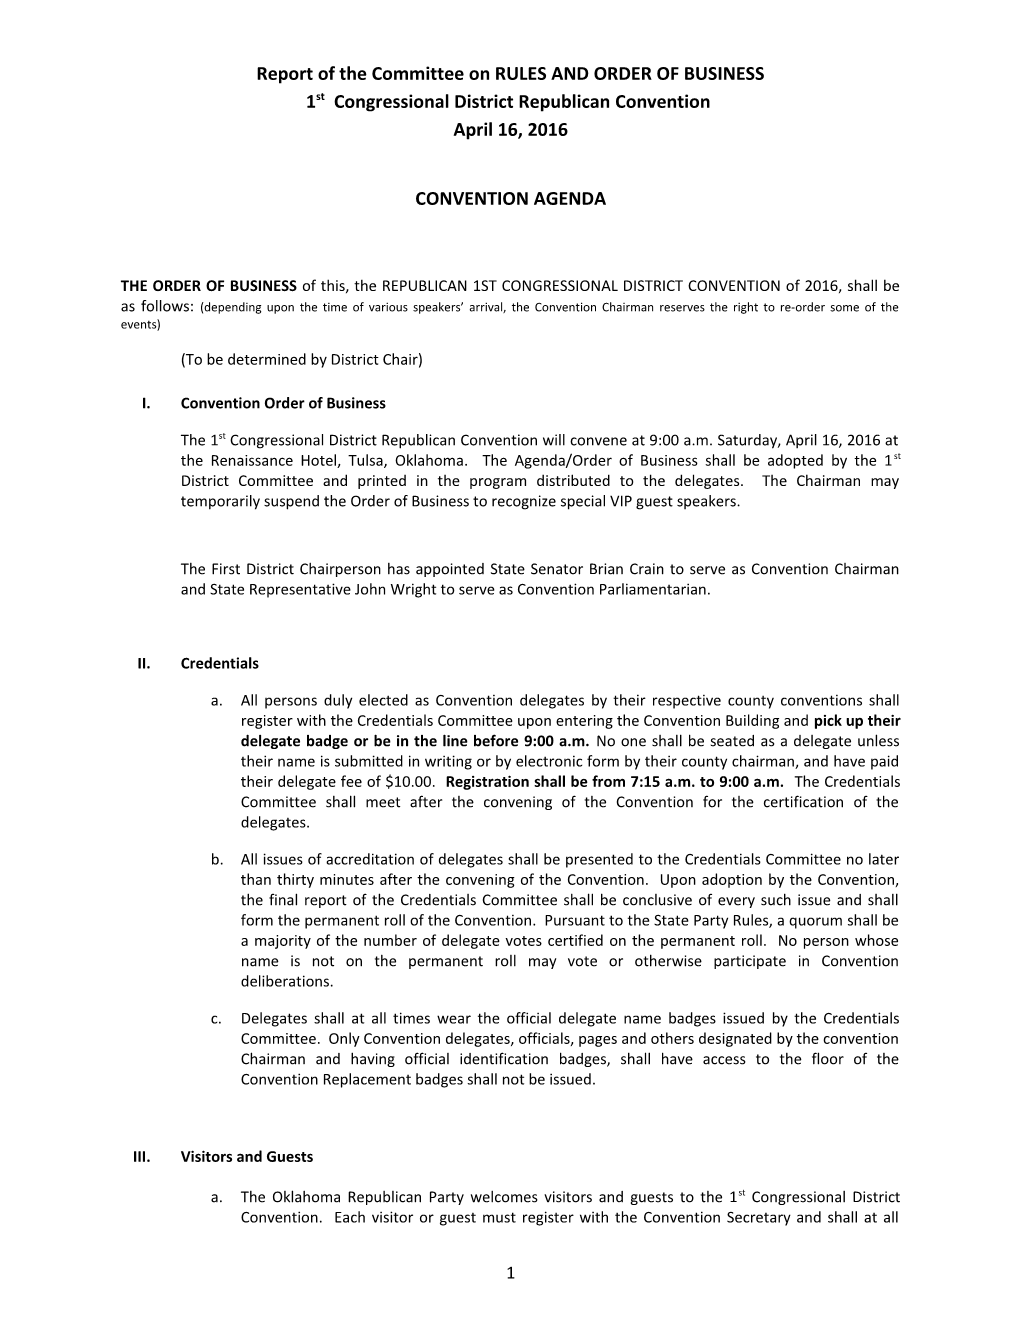 Report of the Committee on RULES and ORDER of BUSINESS